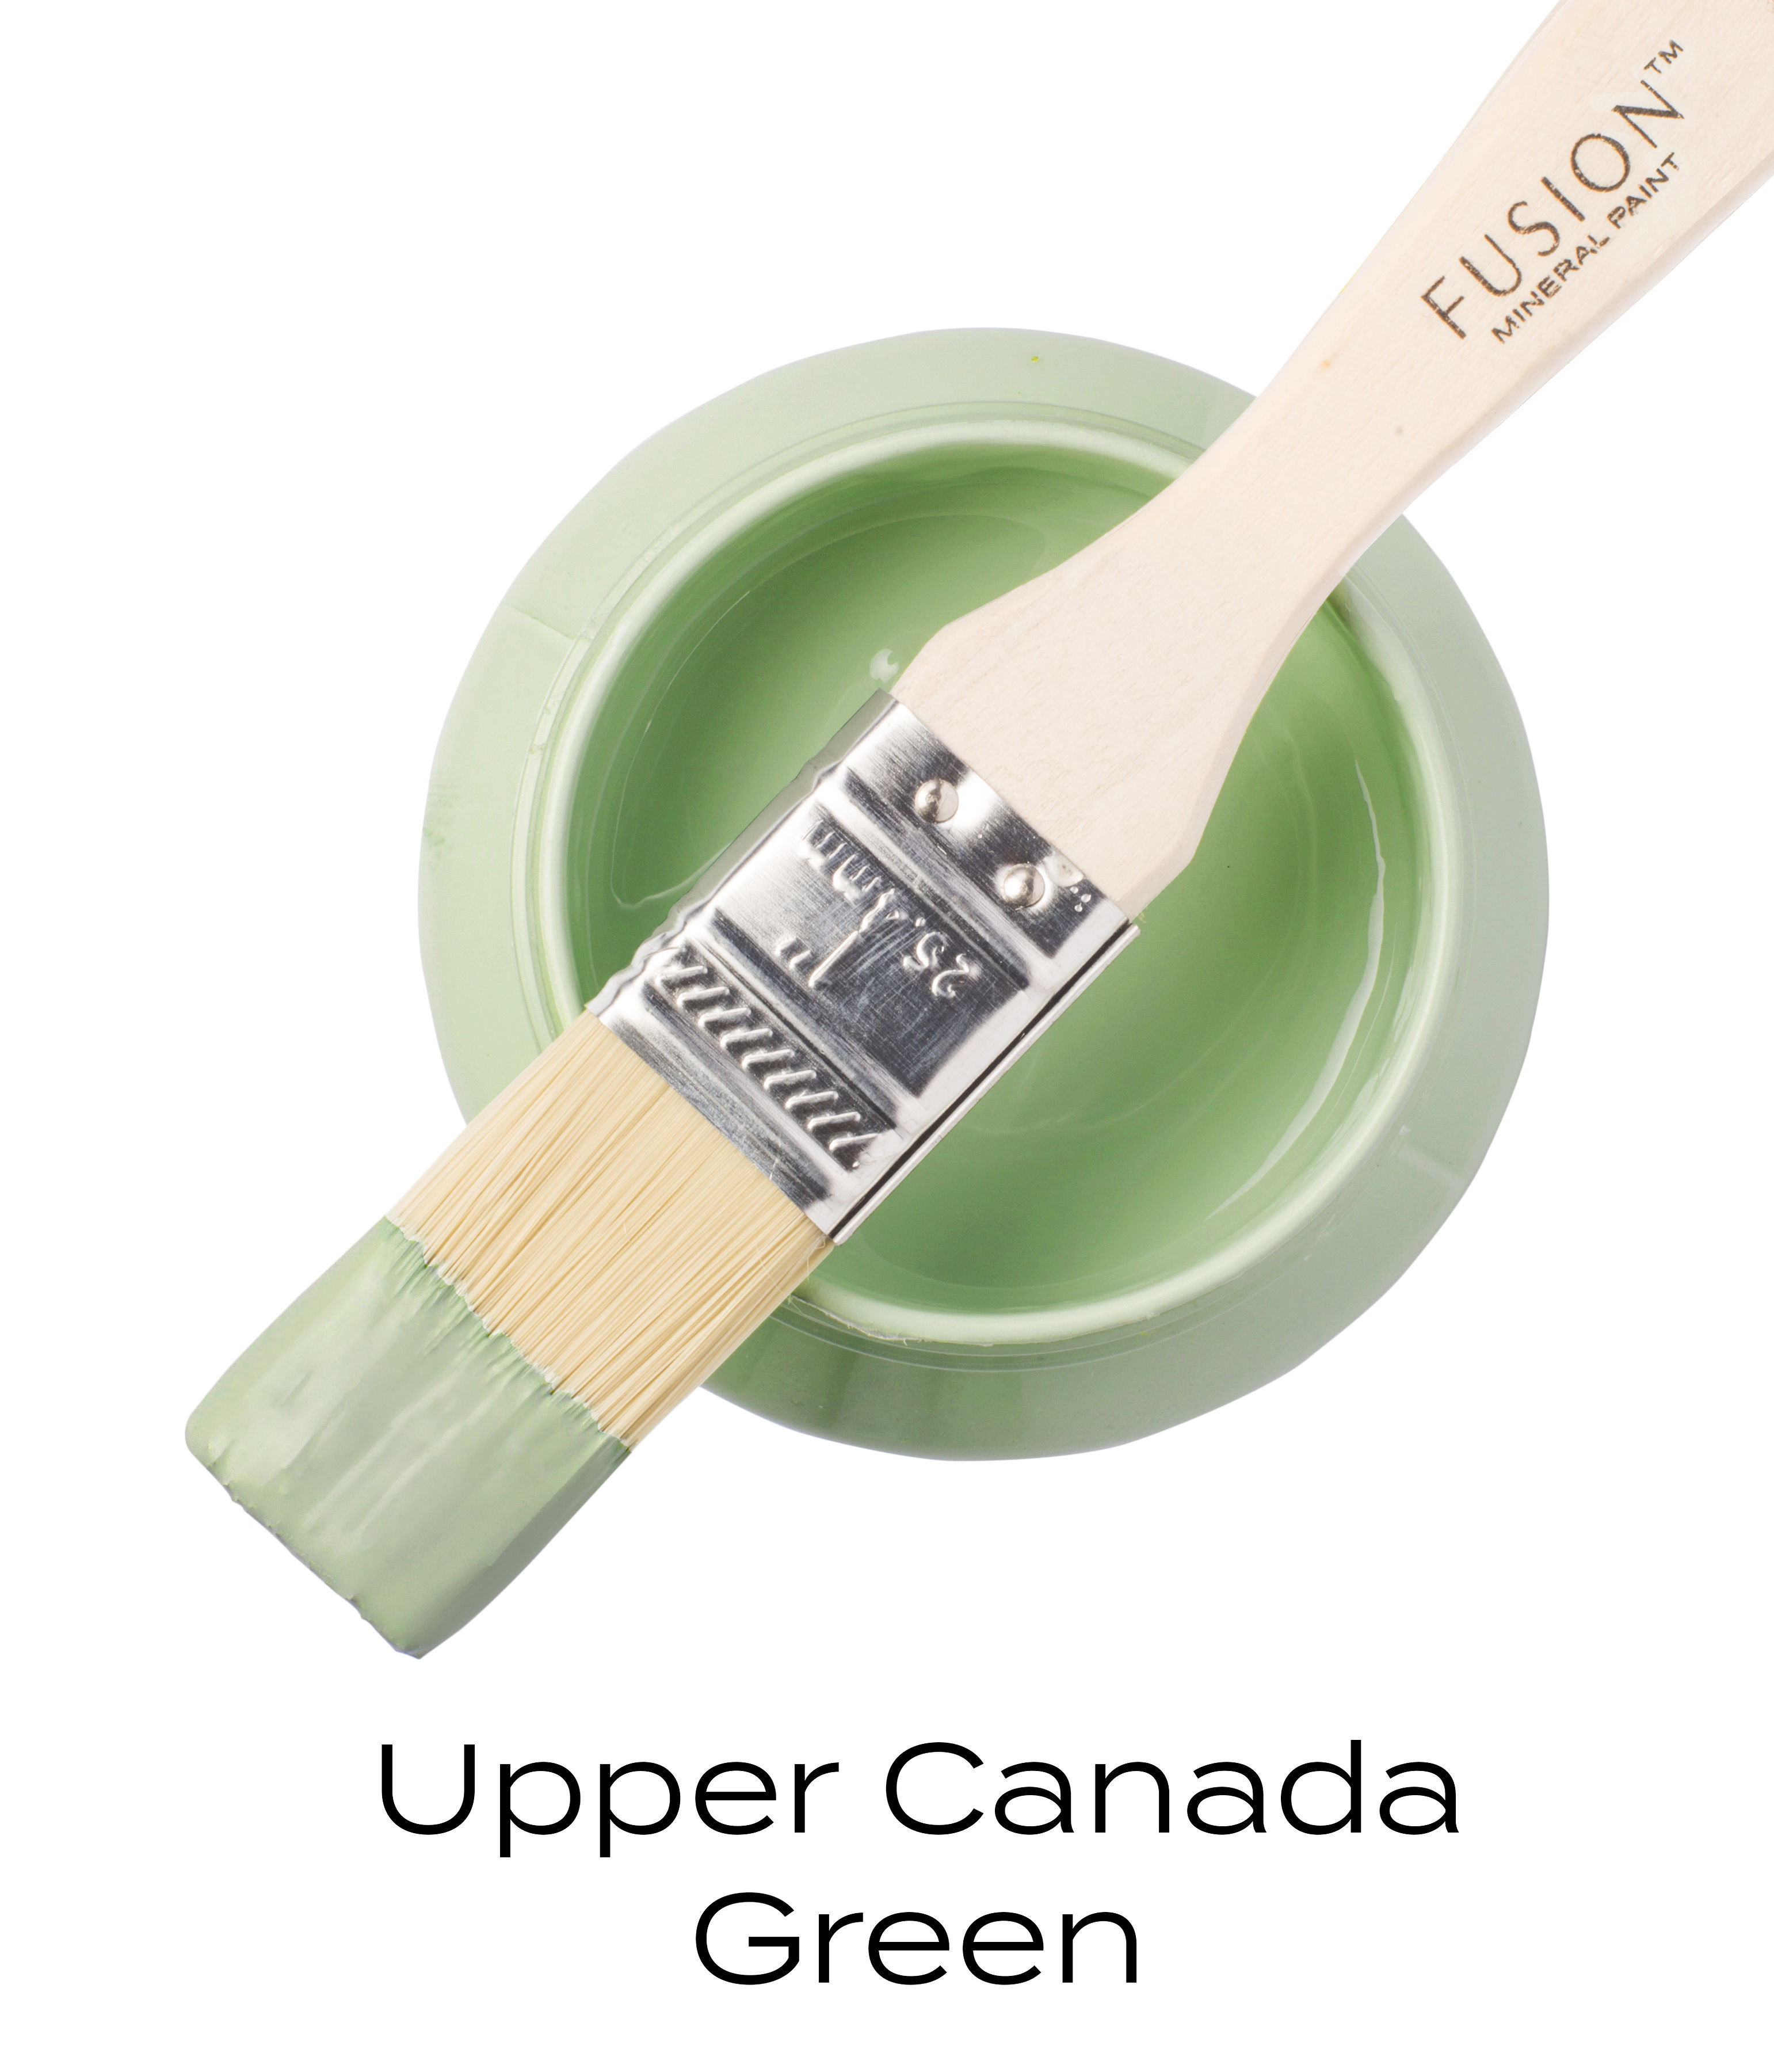 Upper Canada Green Fusion Mineral Paint Goed Gestyled Brielle